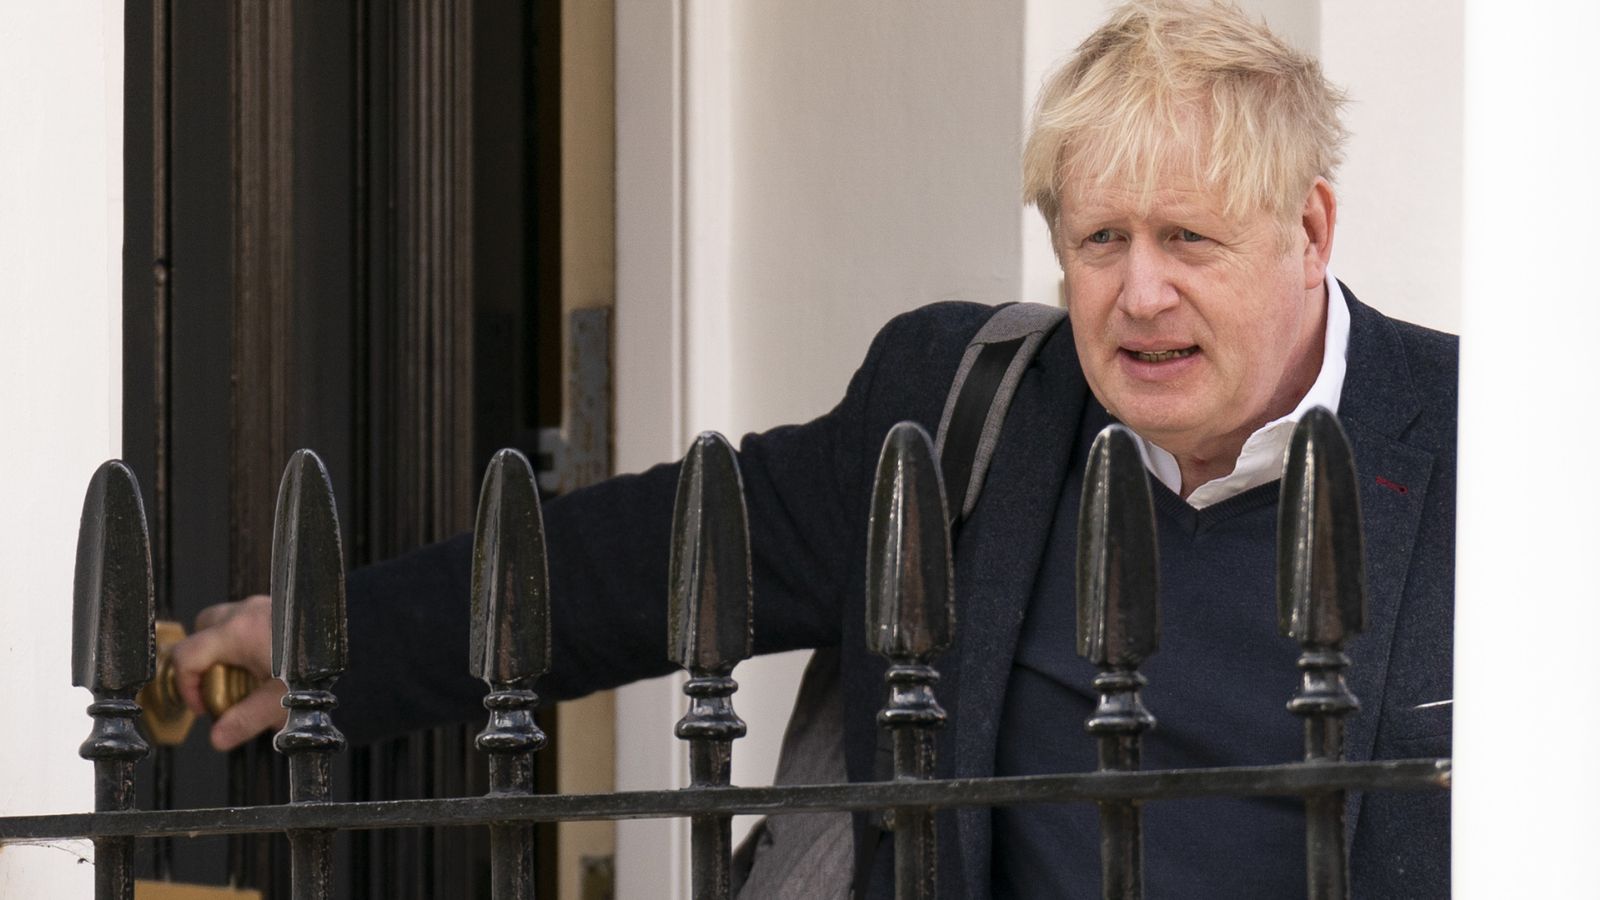 COVID inquiry: Deadline extended for government to hand over Boris Johnson's WhatsApp messages 